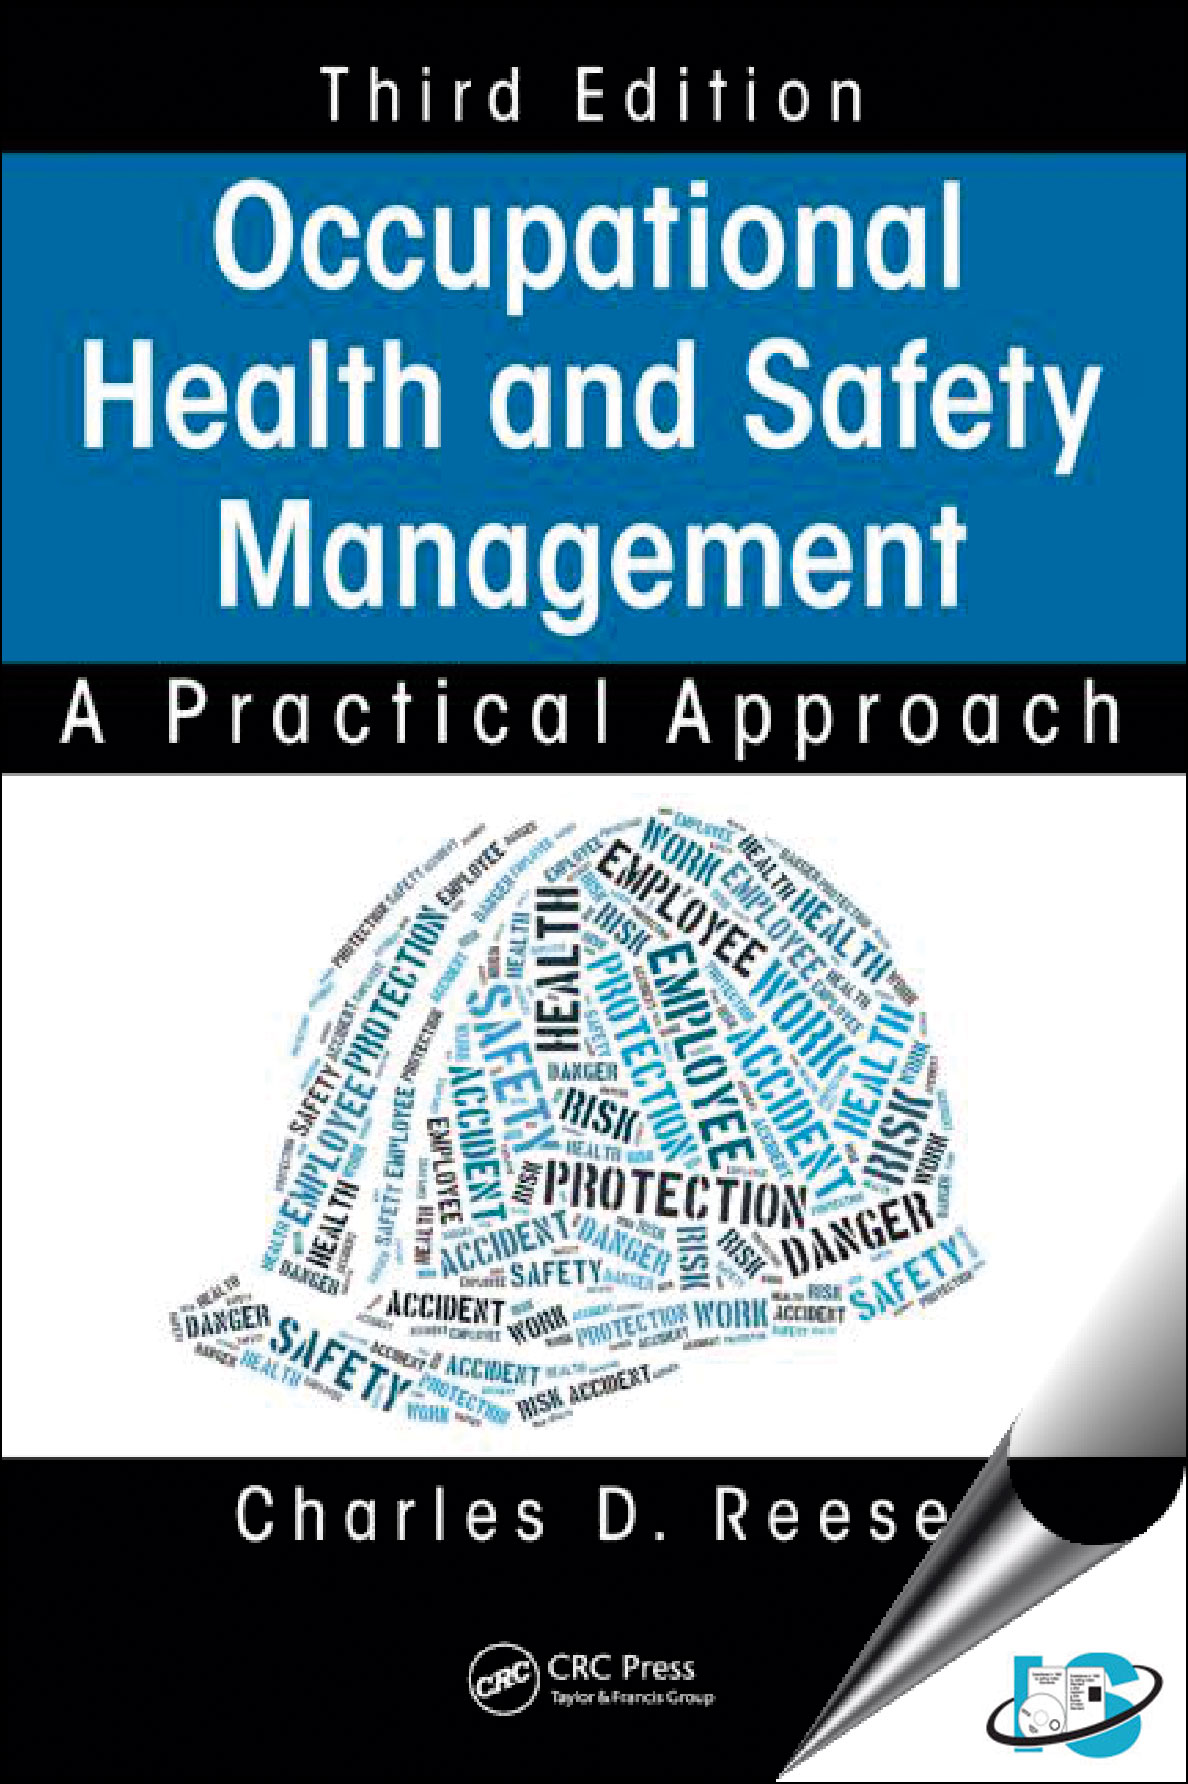 Occupational Health and Safety Management A Practical Approach, 3rd Edition, Charles D. Reese